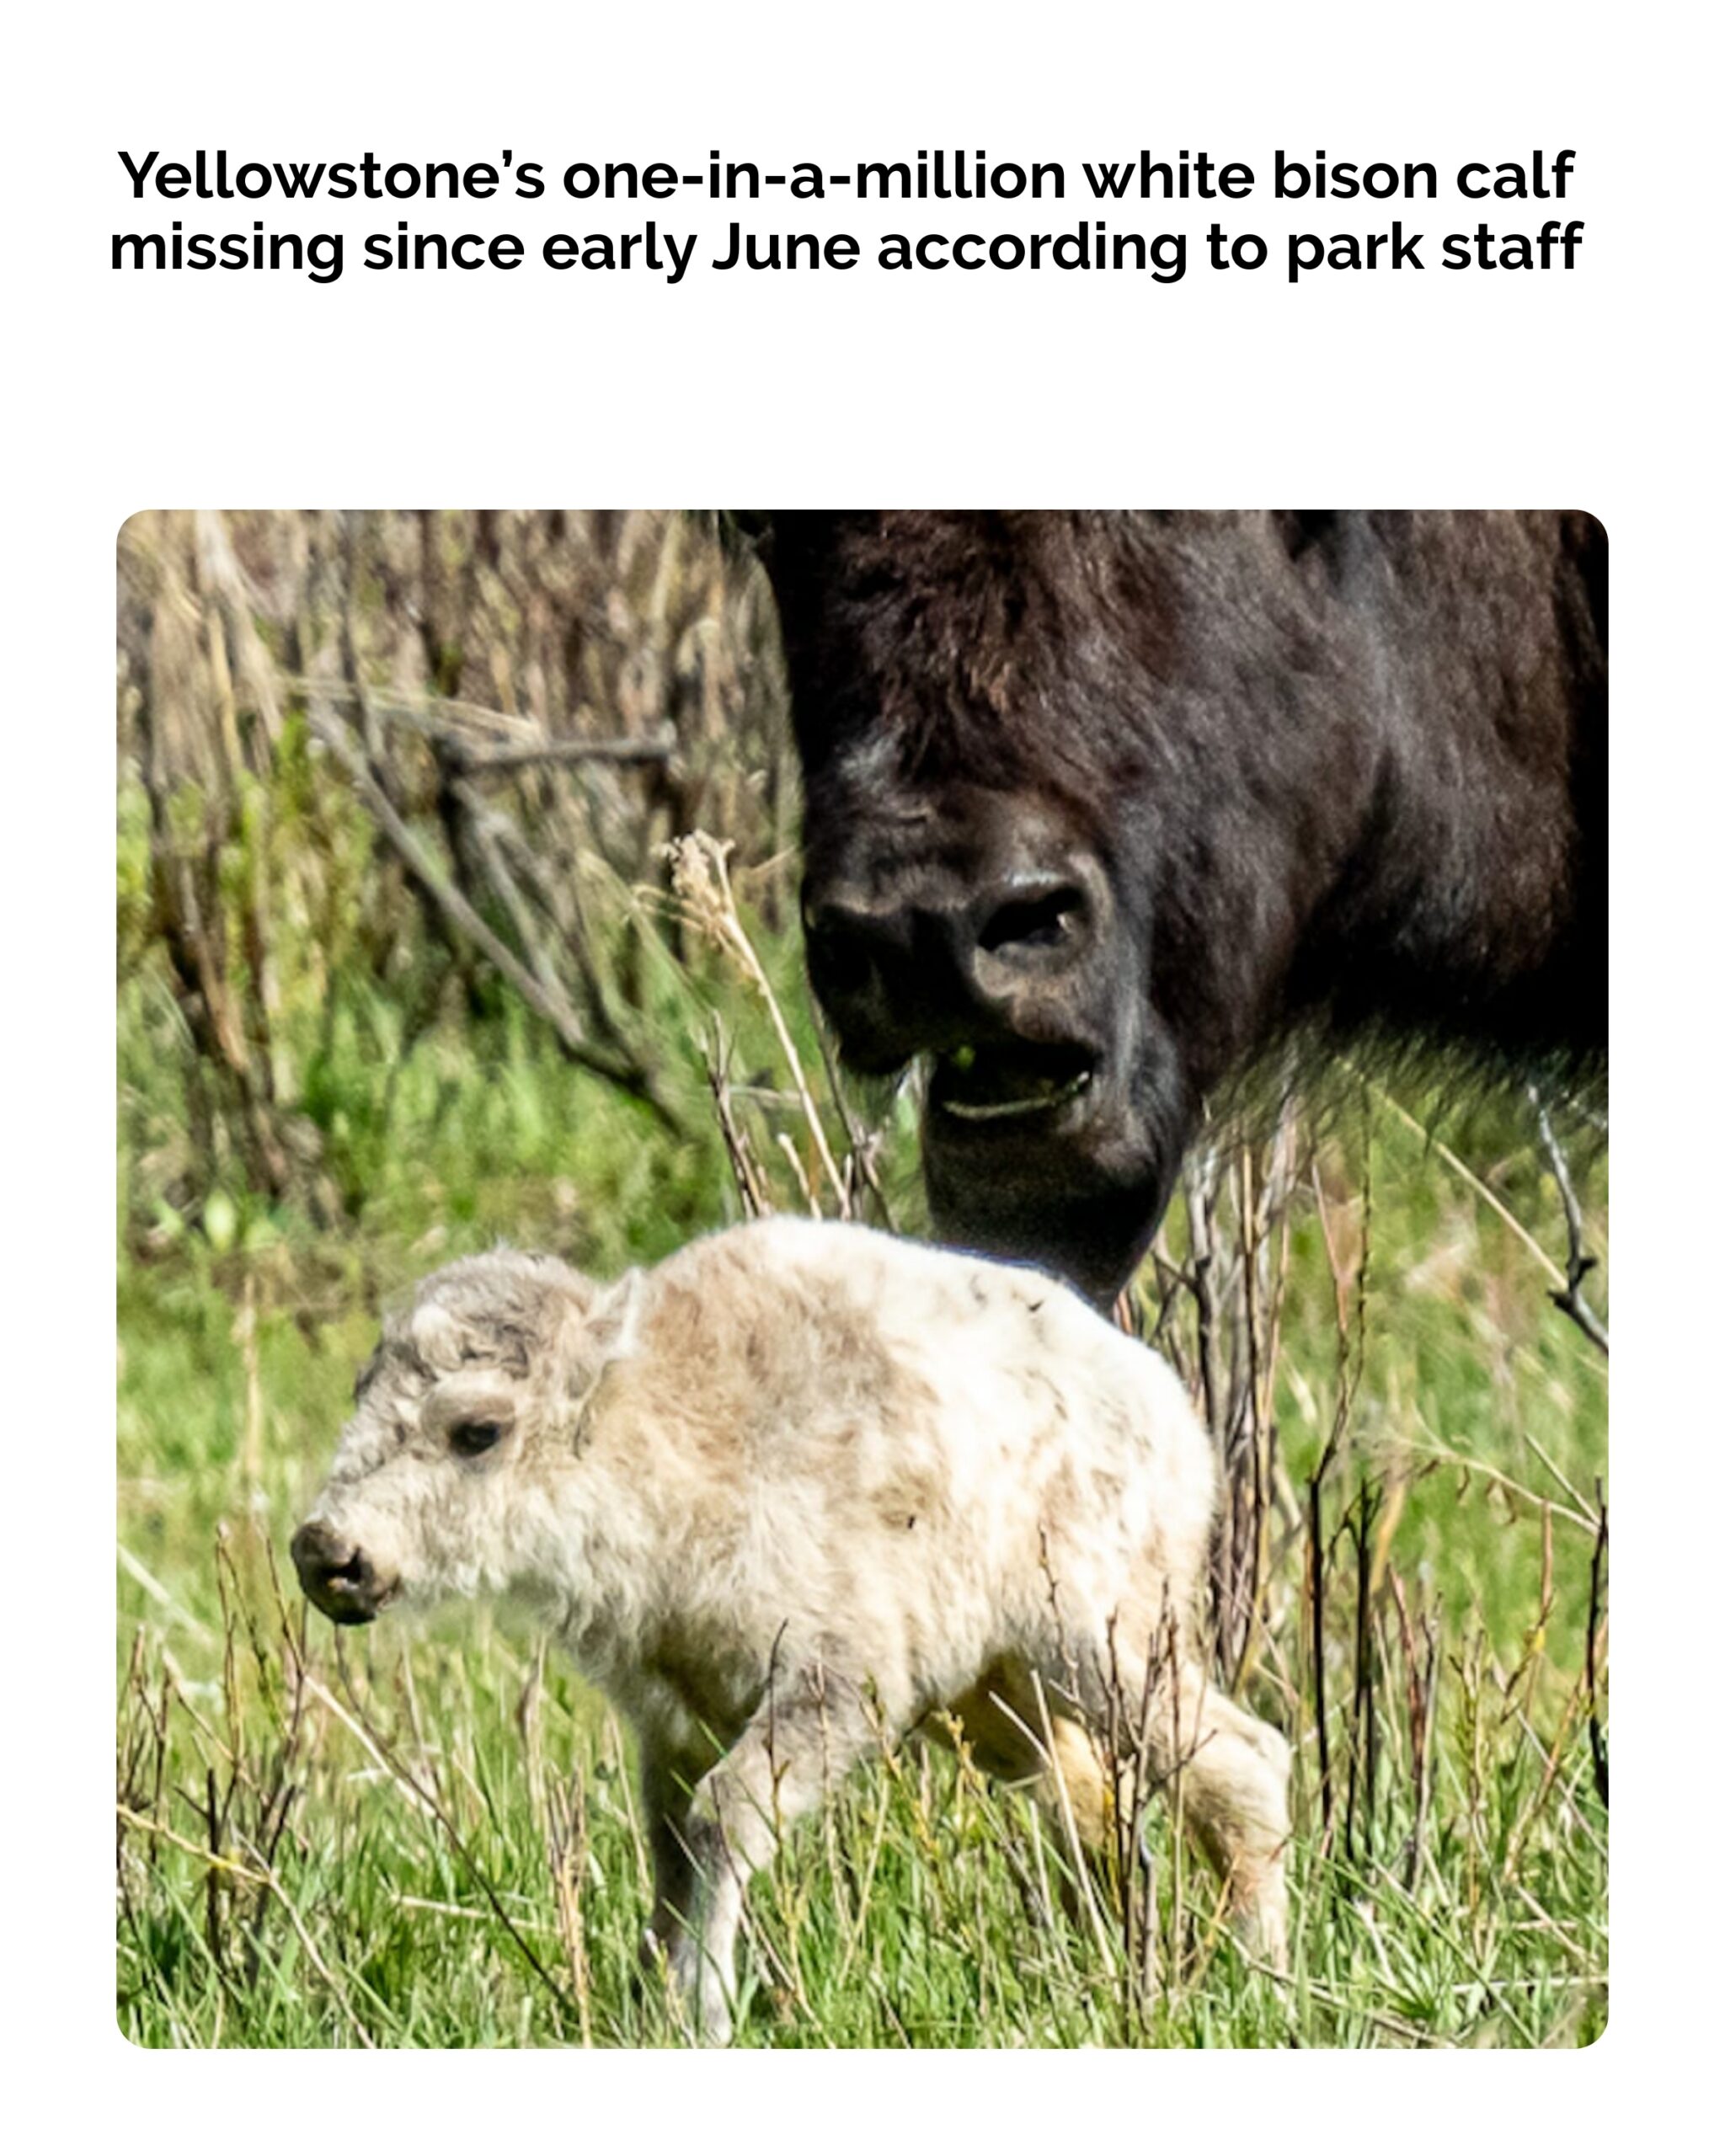 Yellowstone’s one-in-a-million white bison calf missing since early June according to park staff